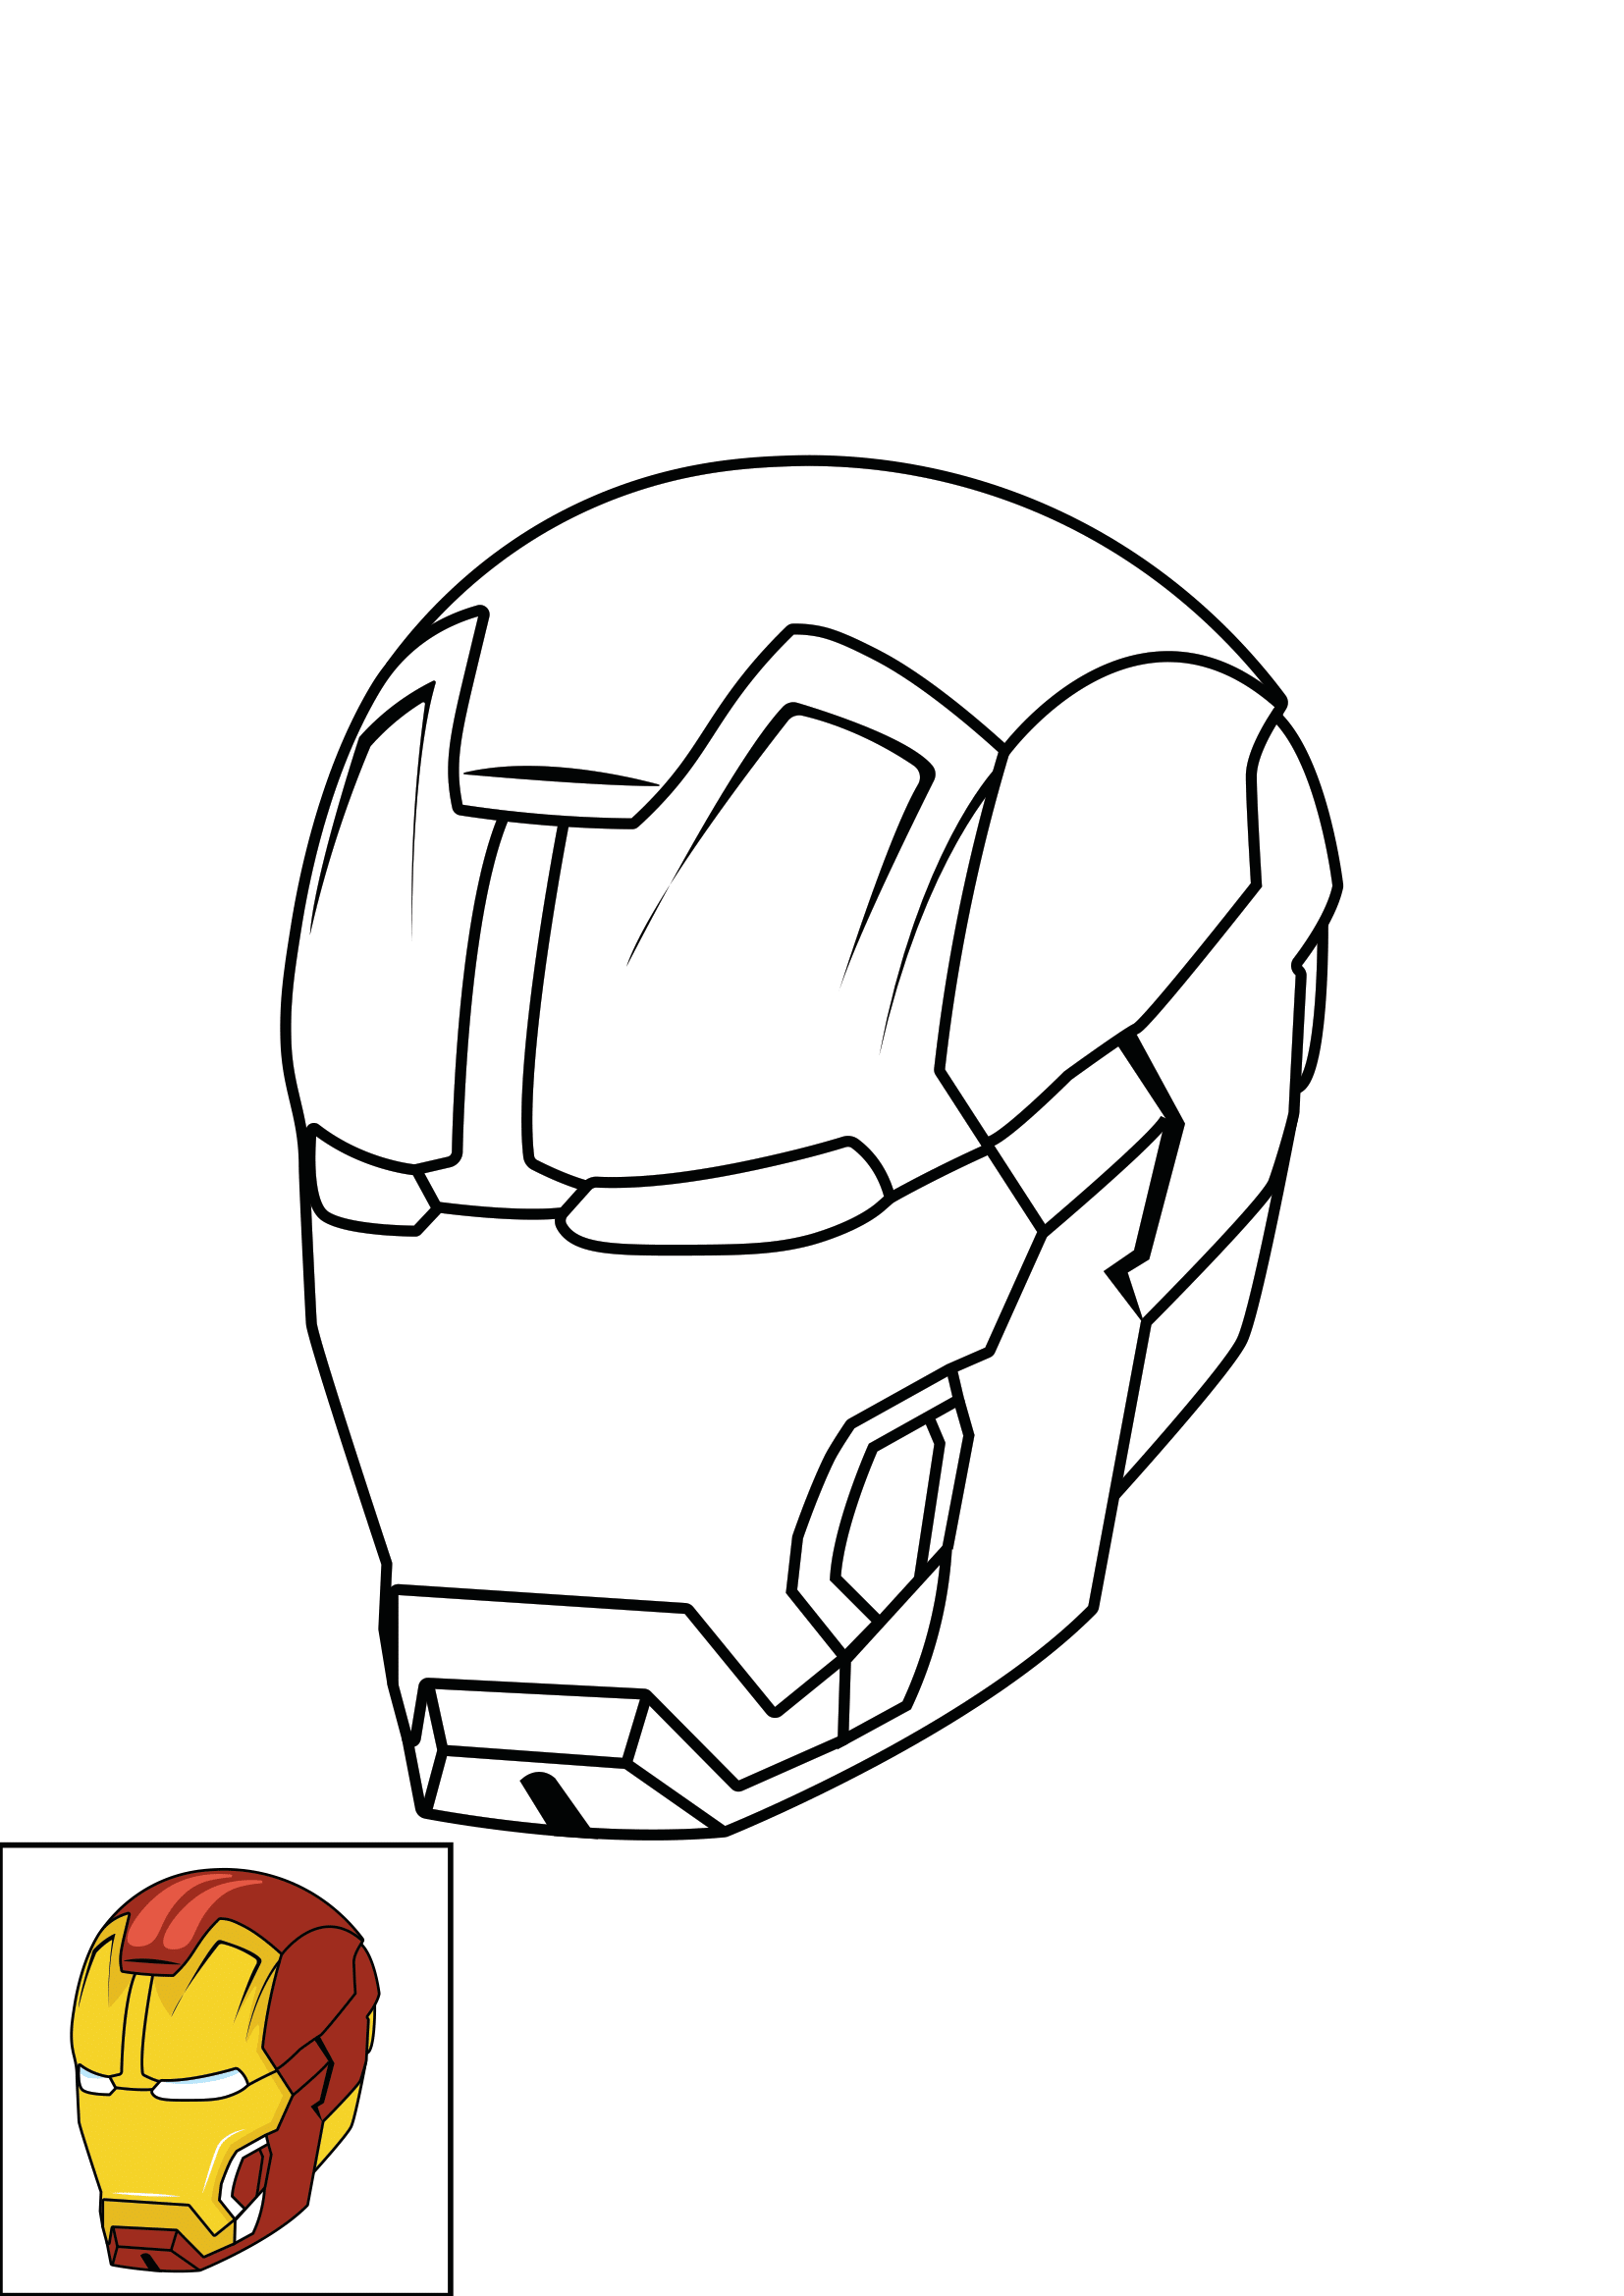 How to Draw The Iron Man Helmet Step by Step